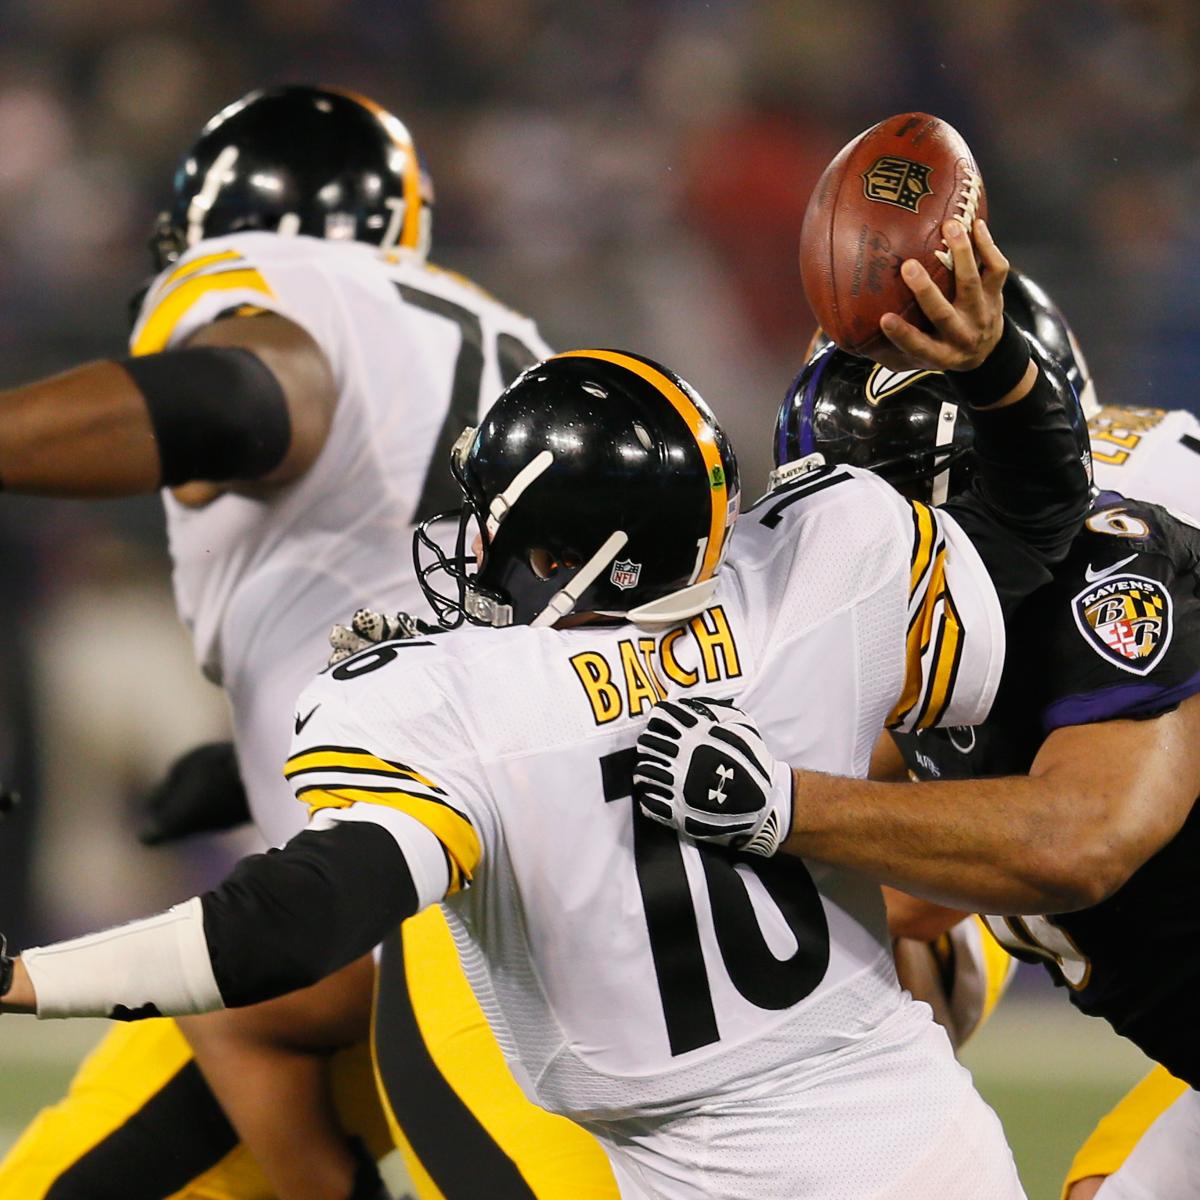 Who was the pittsburgh steelers quarterback before ben roethlisberger information